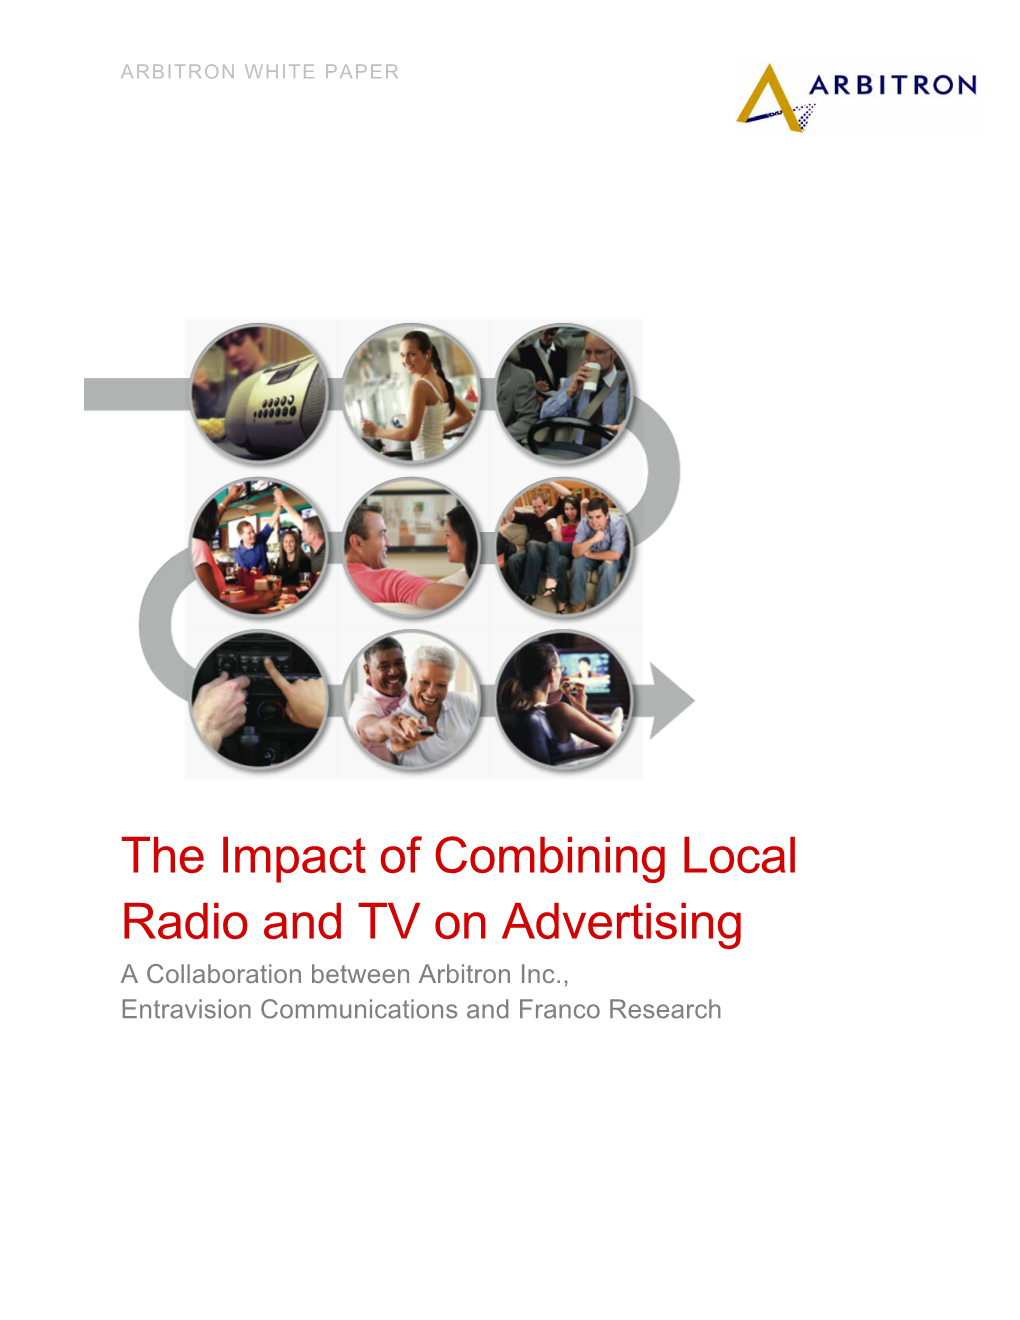 The Impact of Combining Local Radio and TV on Advertising a Collaboration Between Arbitron Inc., Entravision Communications and Franco Research